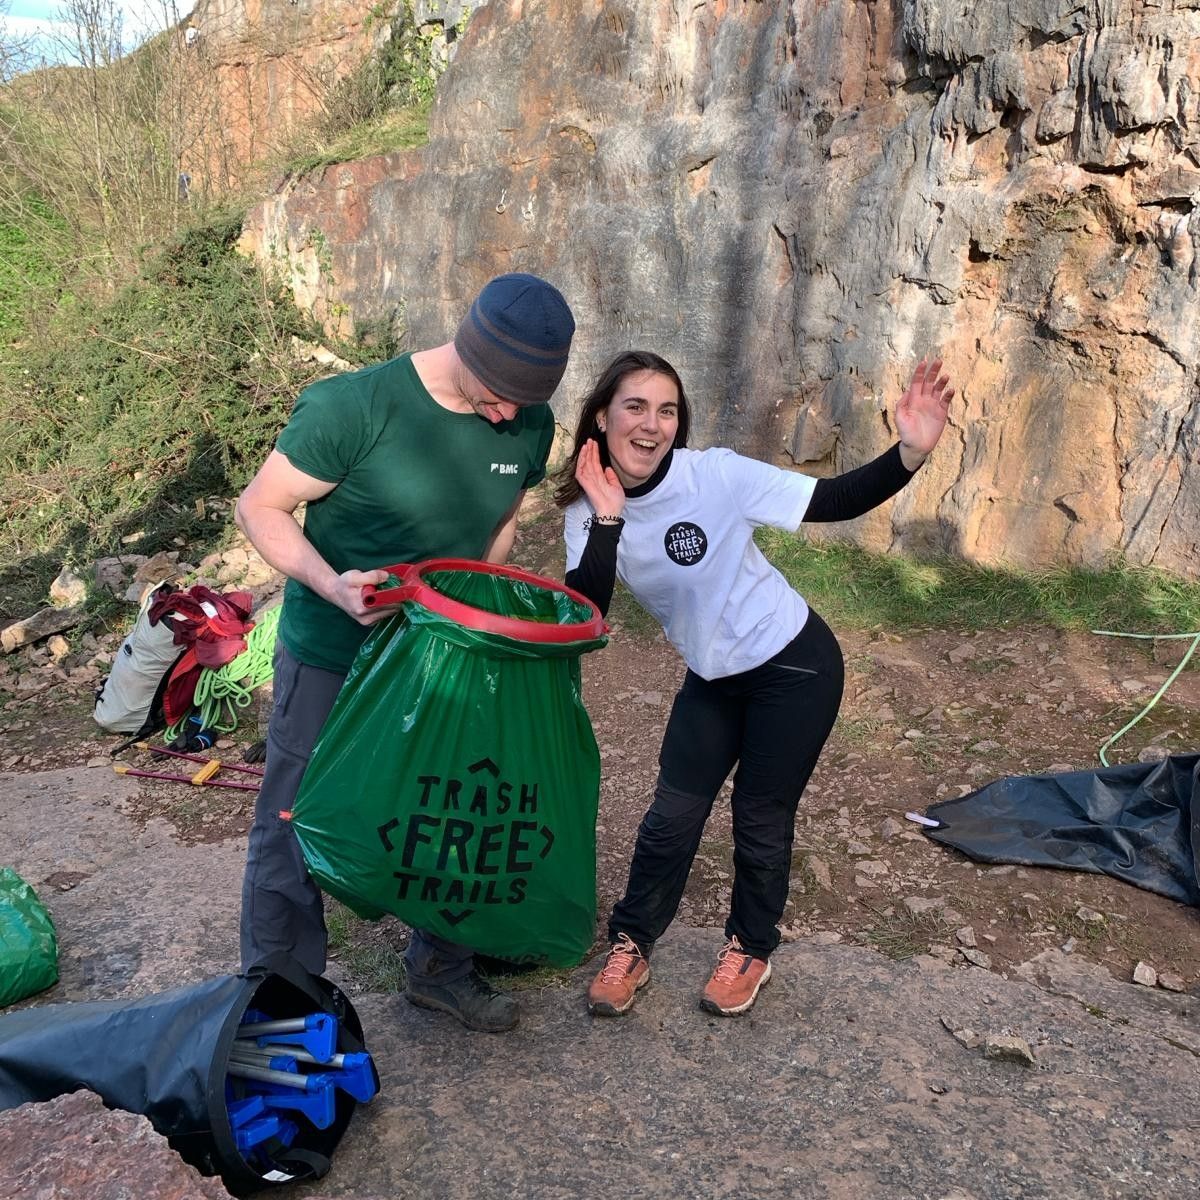 🌟 Last week 23 awesome student volunteers from Bangor Mountaineering Uni Society, one border collie and one BMC Access & Conservation Officer teamed up with @TrashFreeTrails for a crag clean-up at popular limestone crag Penmaen Head. And boy, did they find a lot of litter!⁠